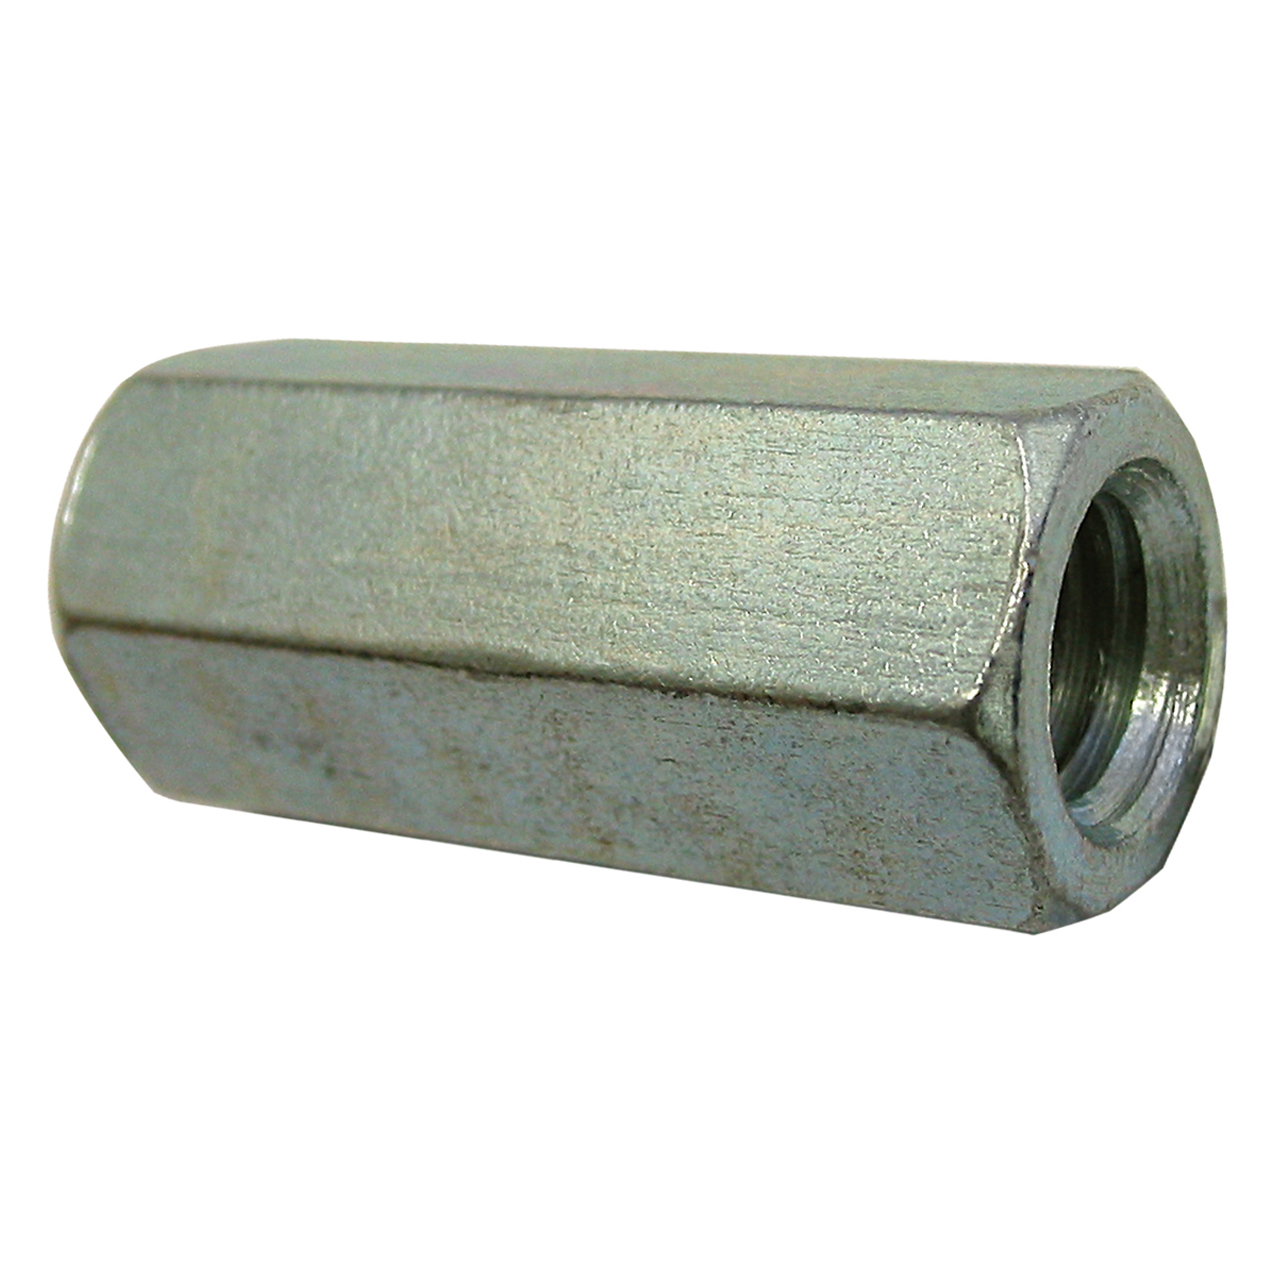 4 Pack 7/16-14 x 1-3/4 Long Hex Coupling Nut with Zinc Plate